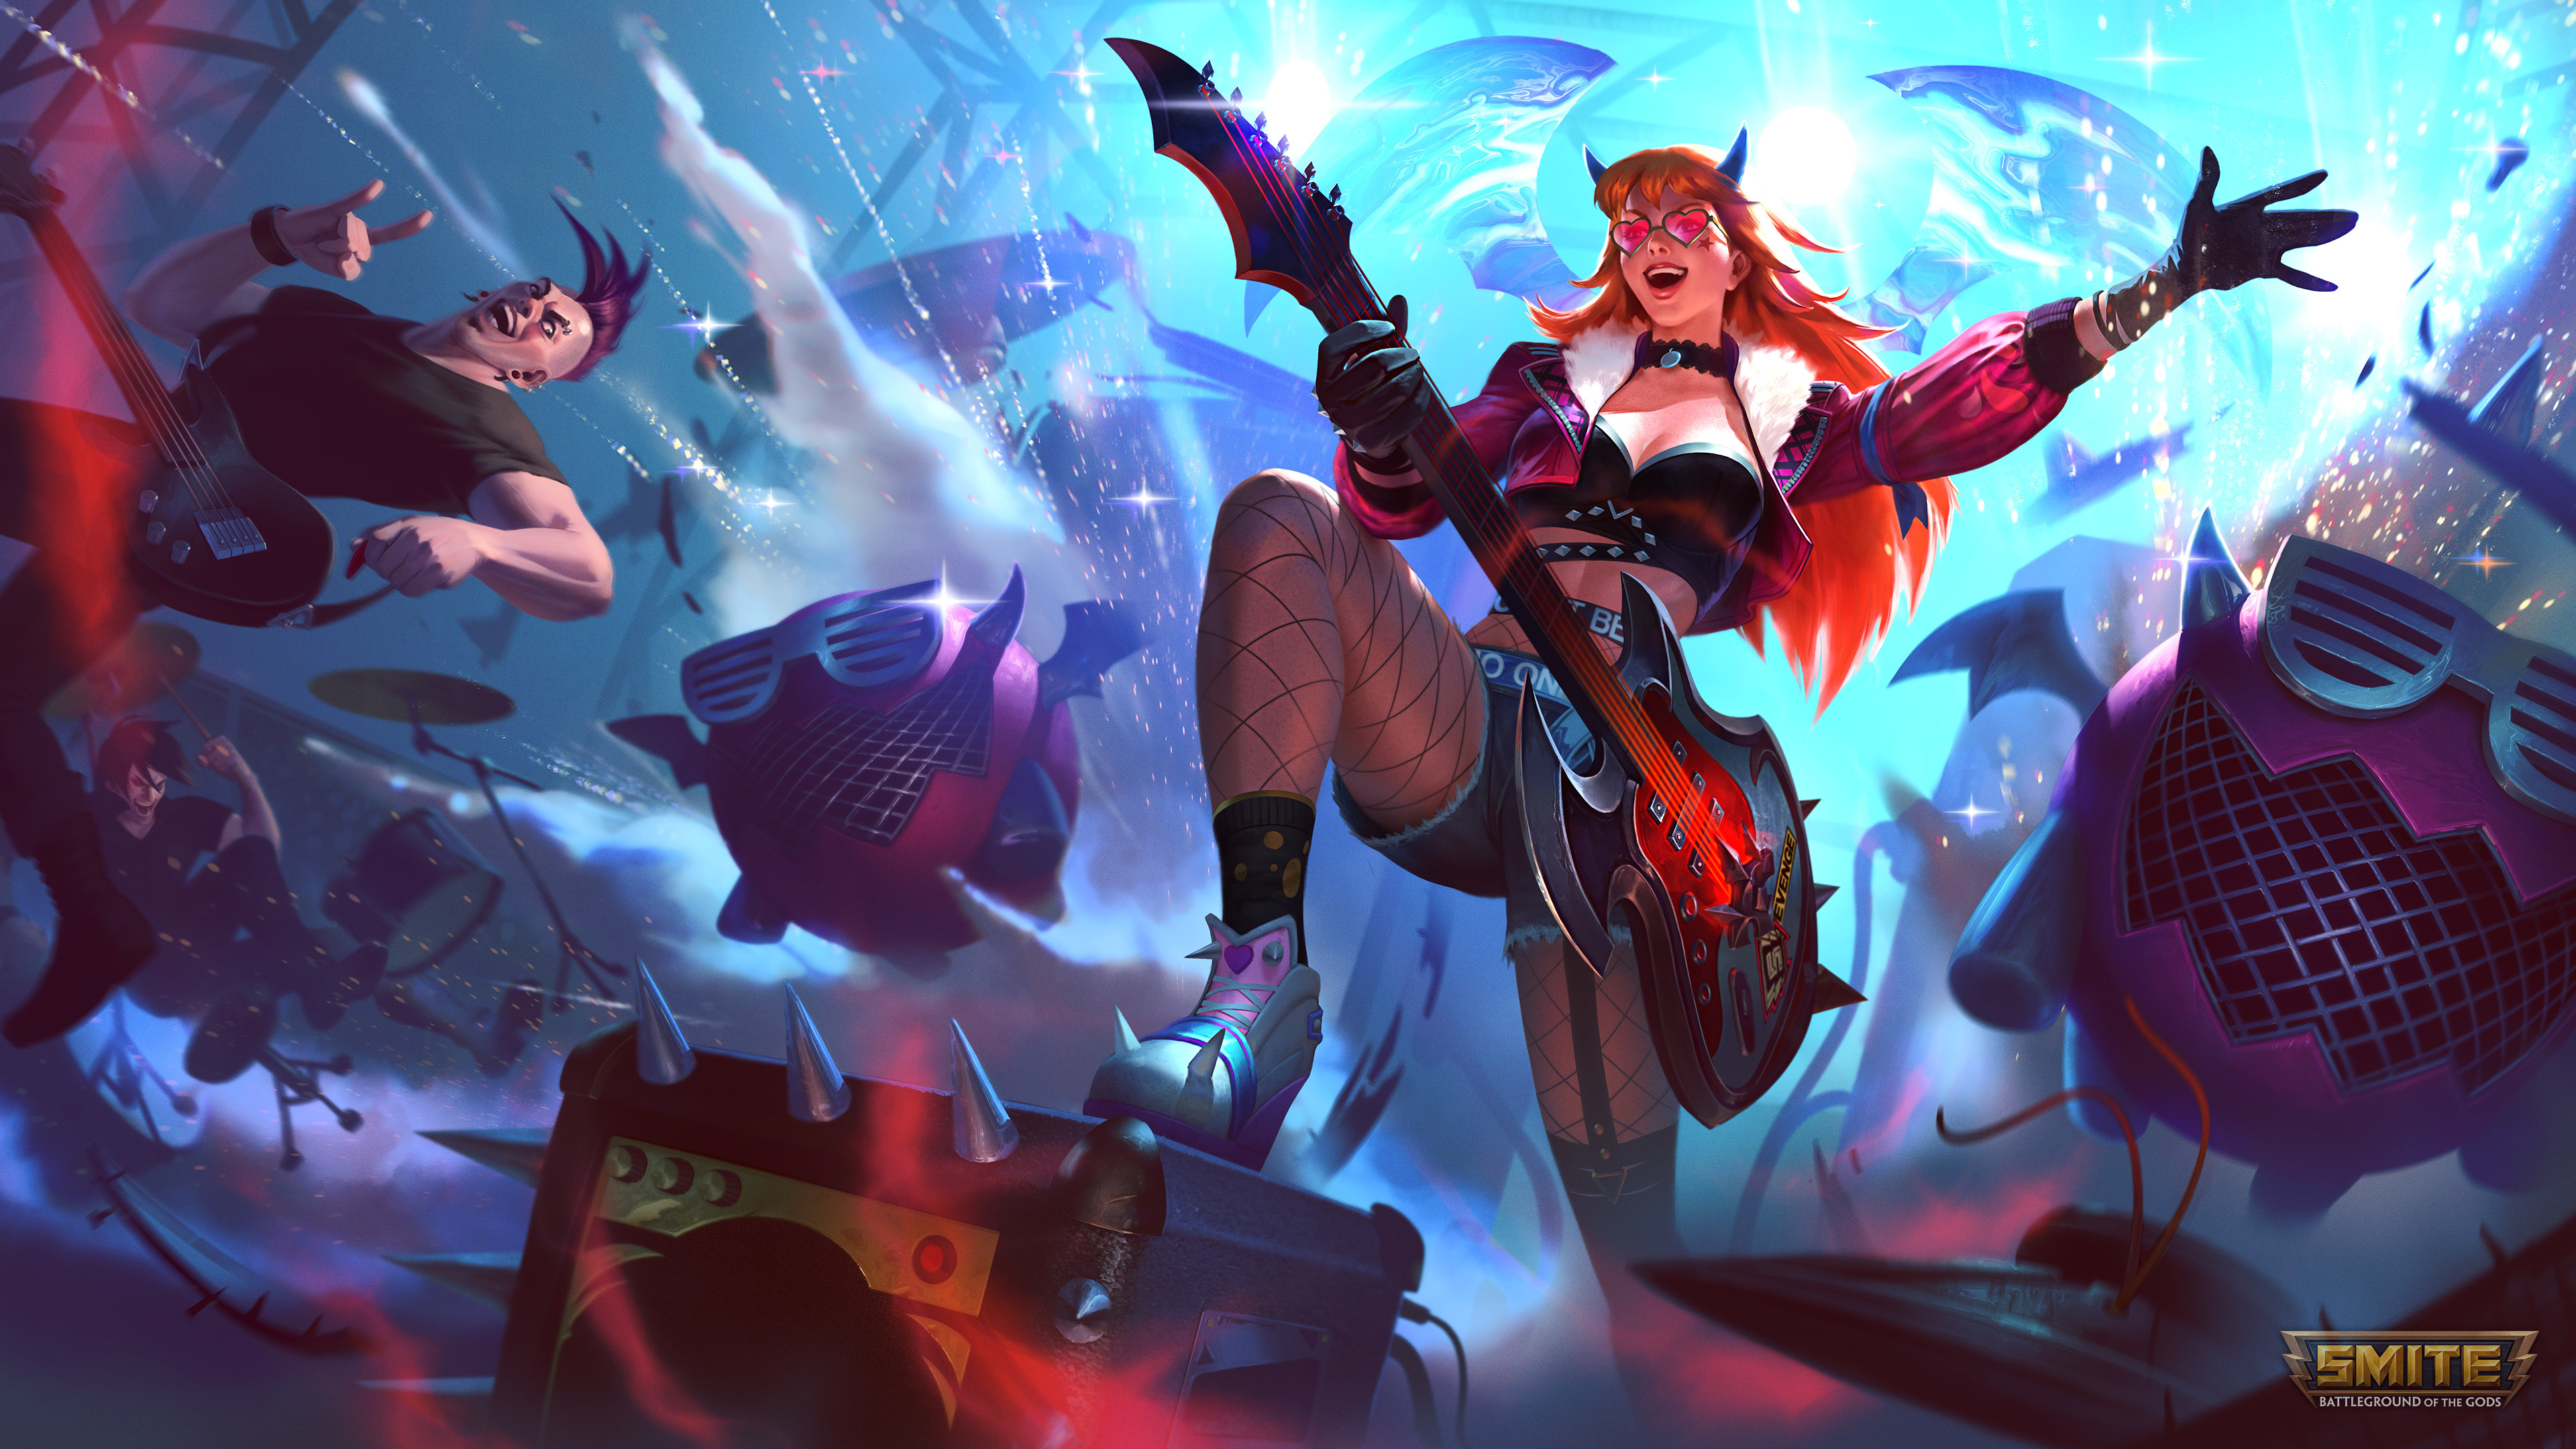 3840x2160 10+ Nemesis (Smite) HD Wallpapers and Backgrounds